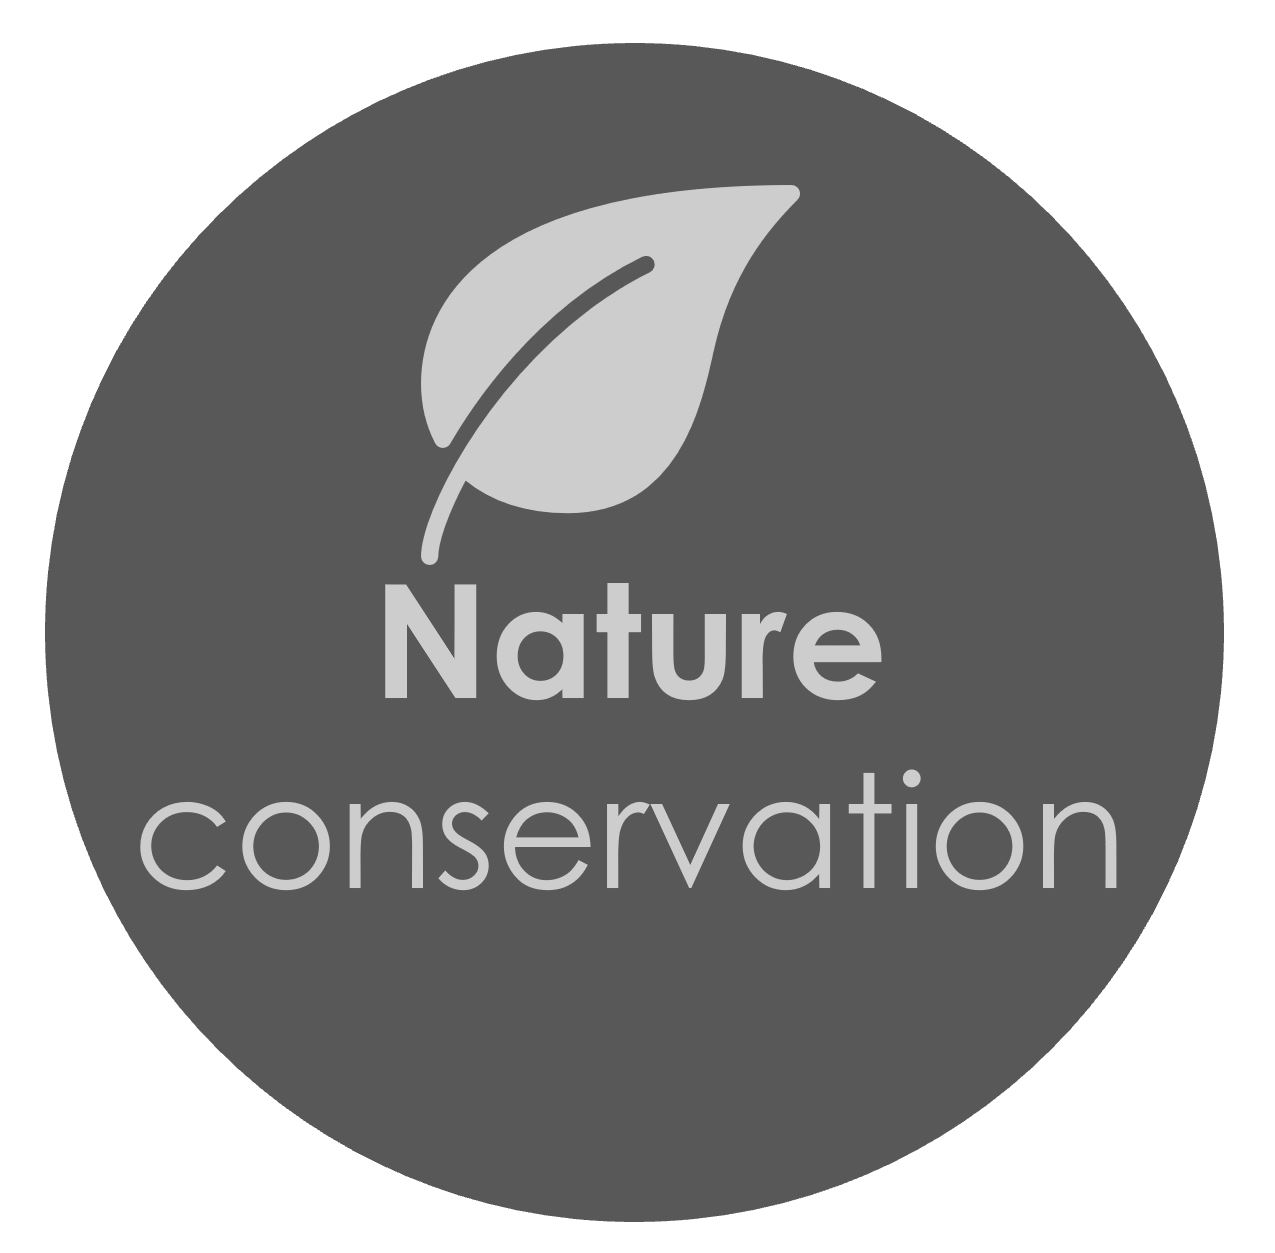 NRM NATURE CONSERVATION ICON